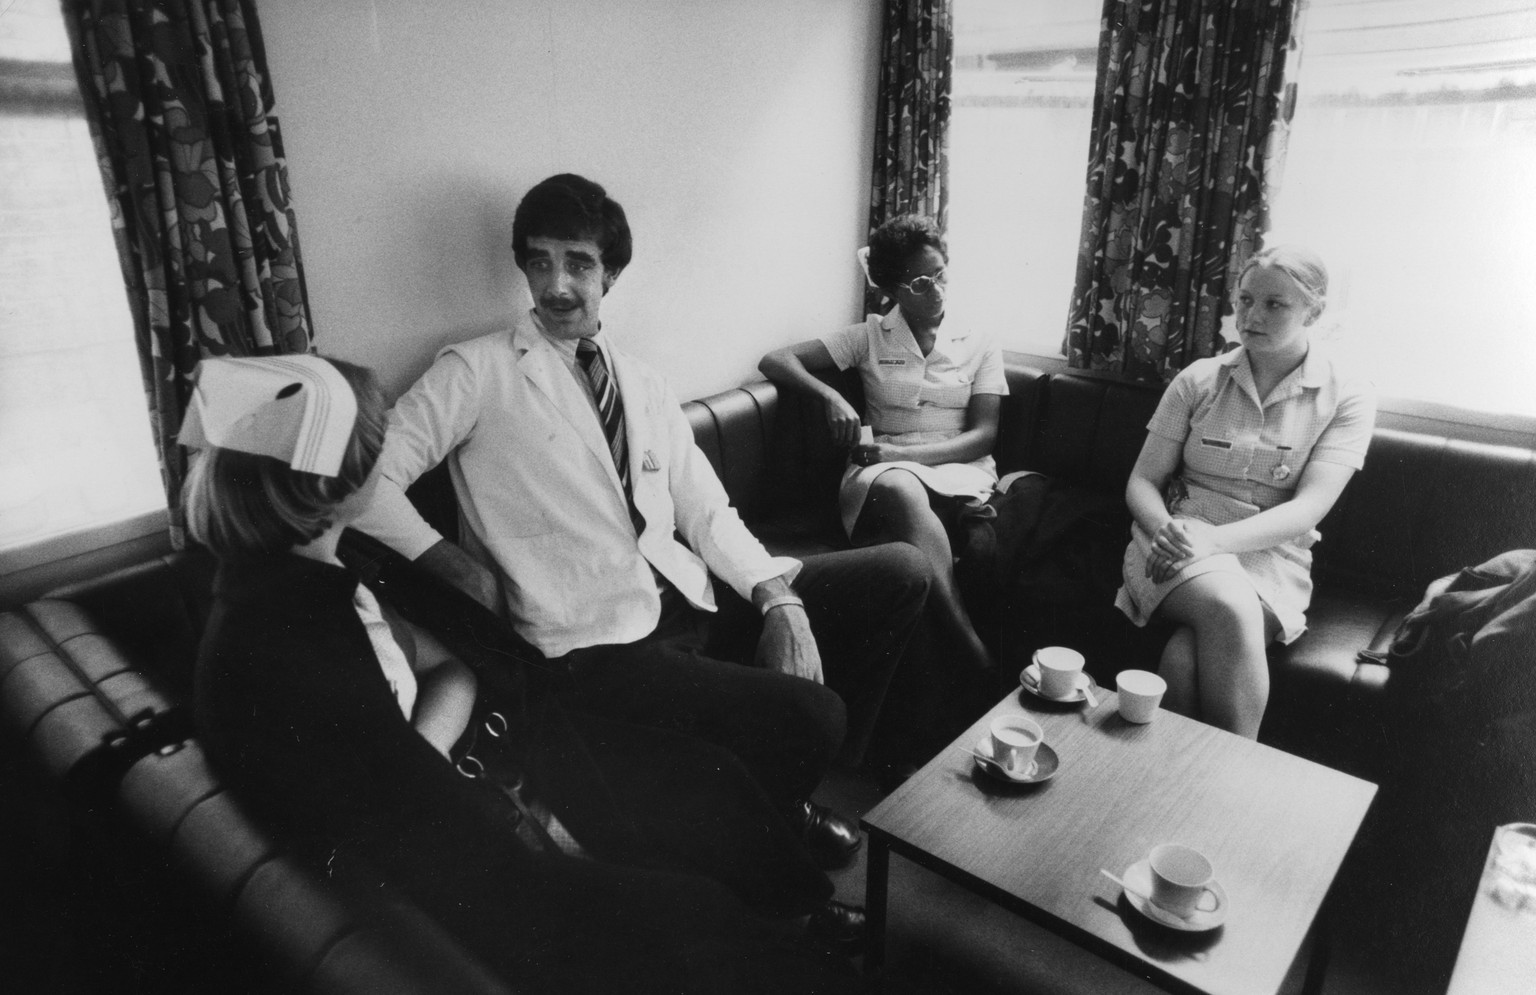 Peter Mayhew At Work
English actor Peter Mayhew (1944 - 2019), with nurses during a tea break at King&#039;s College Hospital, London, where he works as an orderly, 22nd August 1977. Mayhew, who is 7  ...